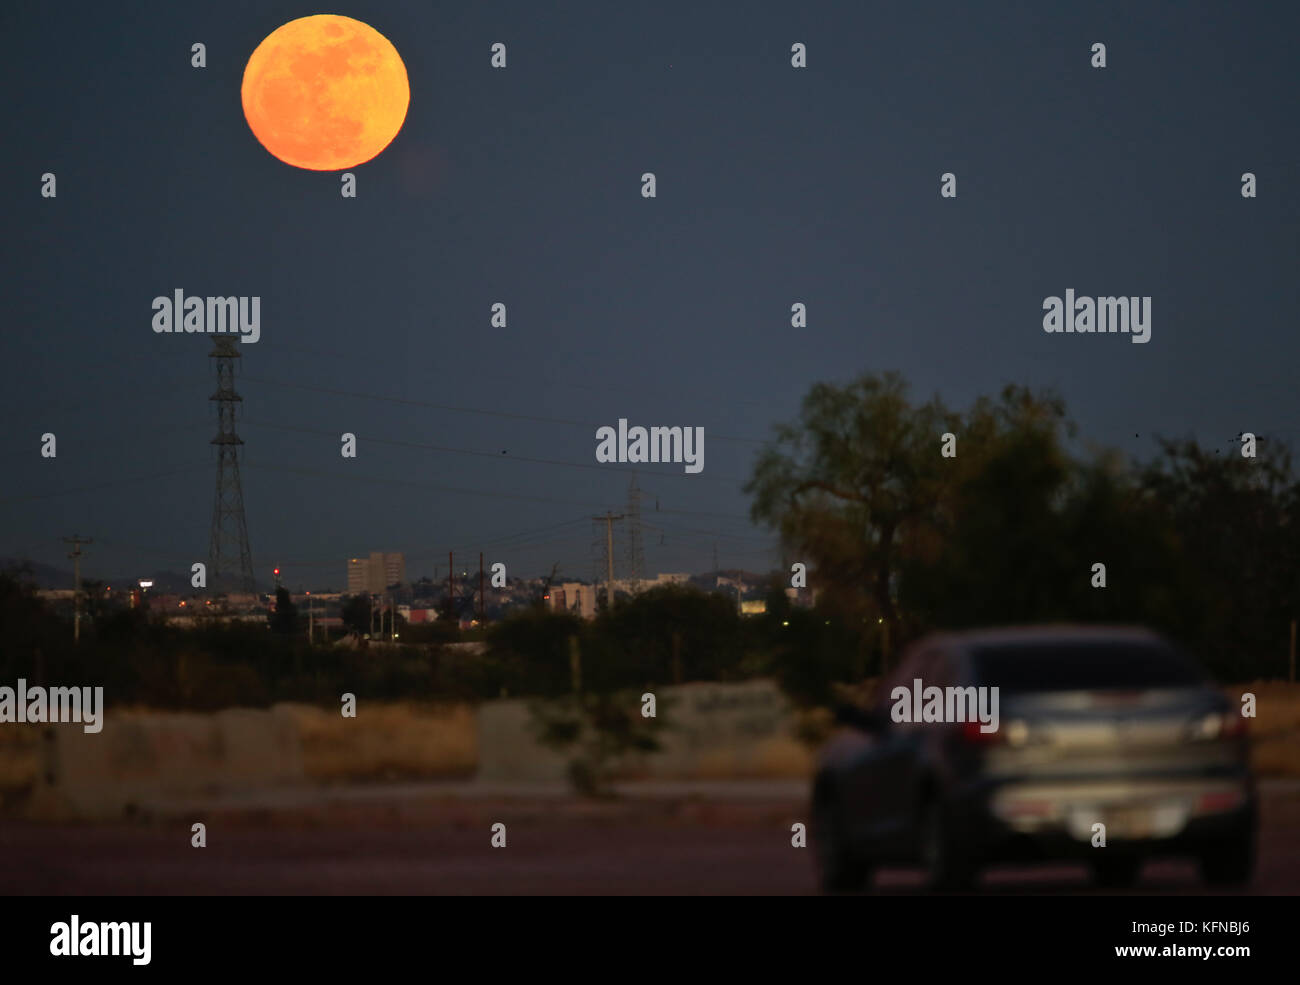 One of the first 2013 full moons could be seen today before anocecer on the sky to the east of the city of Hermosillo, Sonora. The Moon is the only natural satellite of Earth. With an equatorial diameter km1 3474 is the solar system's largest satellite fifth, while as compared to the proportional size of its planet is the largest satellite: one quarter the diameter of Earth and 1/81 its mass. Una de las primeras lunas llenas del año 2013 se pudo apreciar hoy  antes del anocecer sobre el cielo al  oriente de la ciudad de Hermosillo, Sonora. La Luna es el único satélite natural de la Tierra. Con Stock Photo